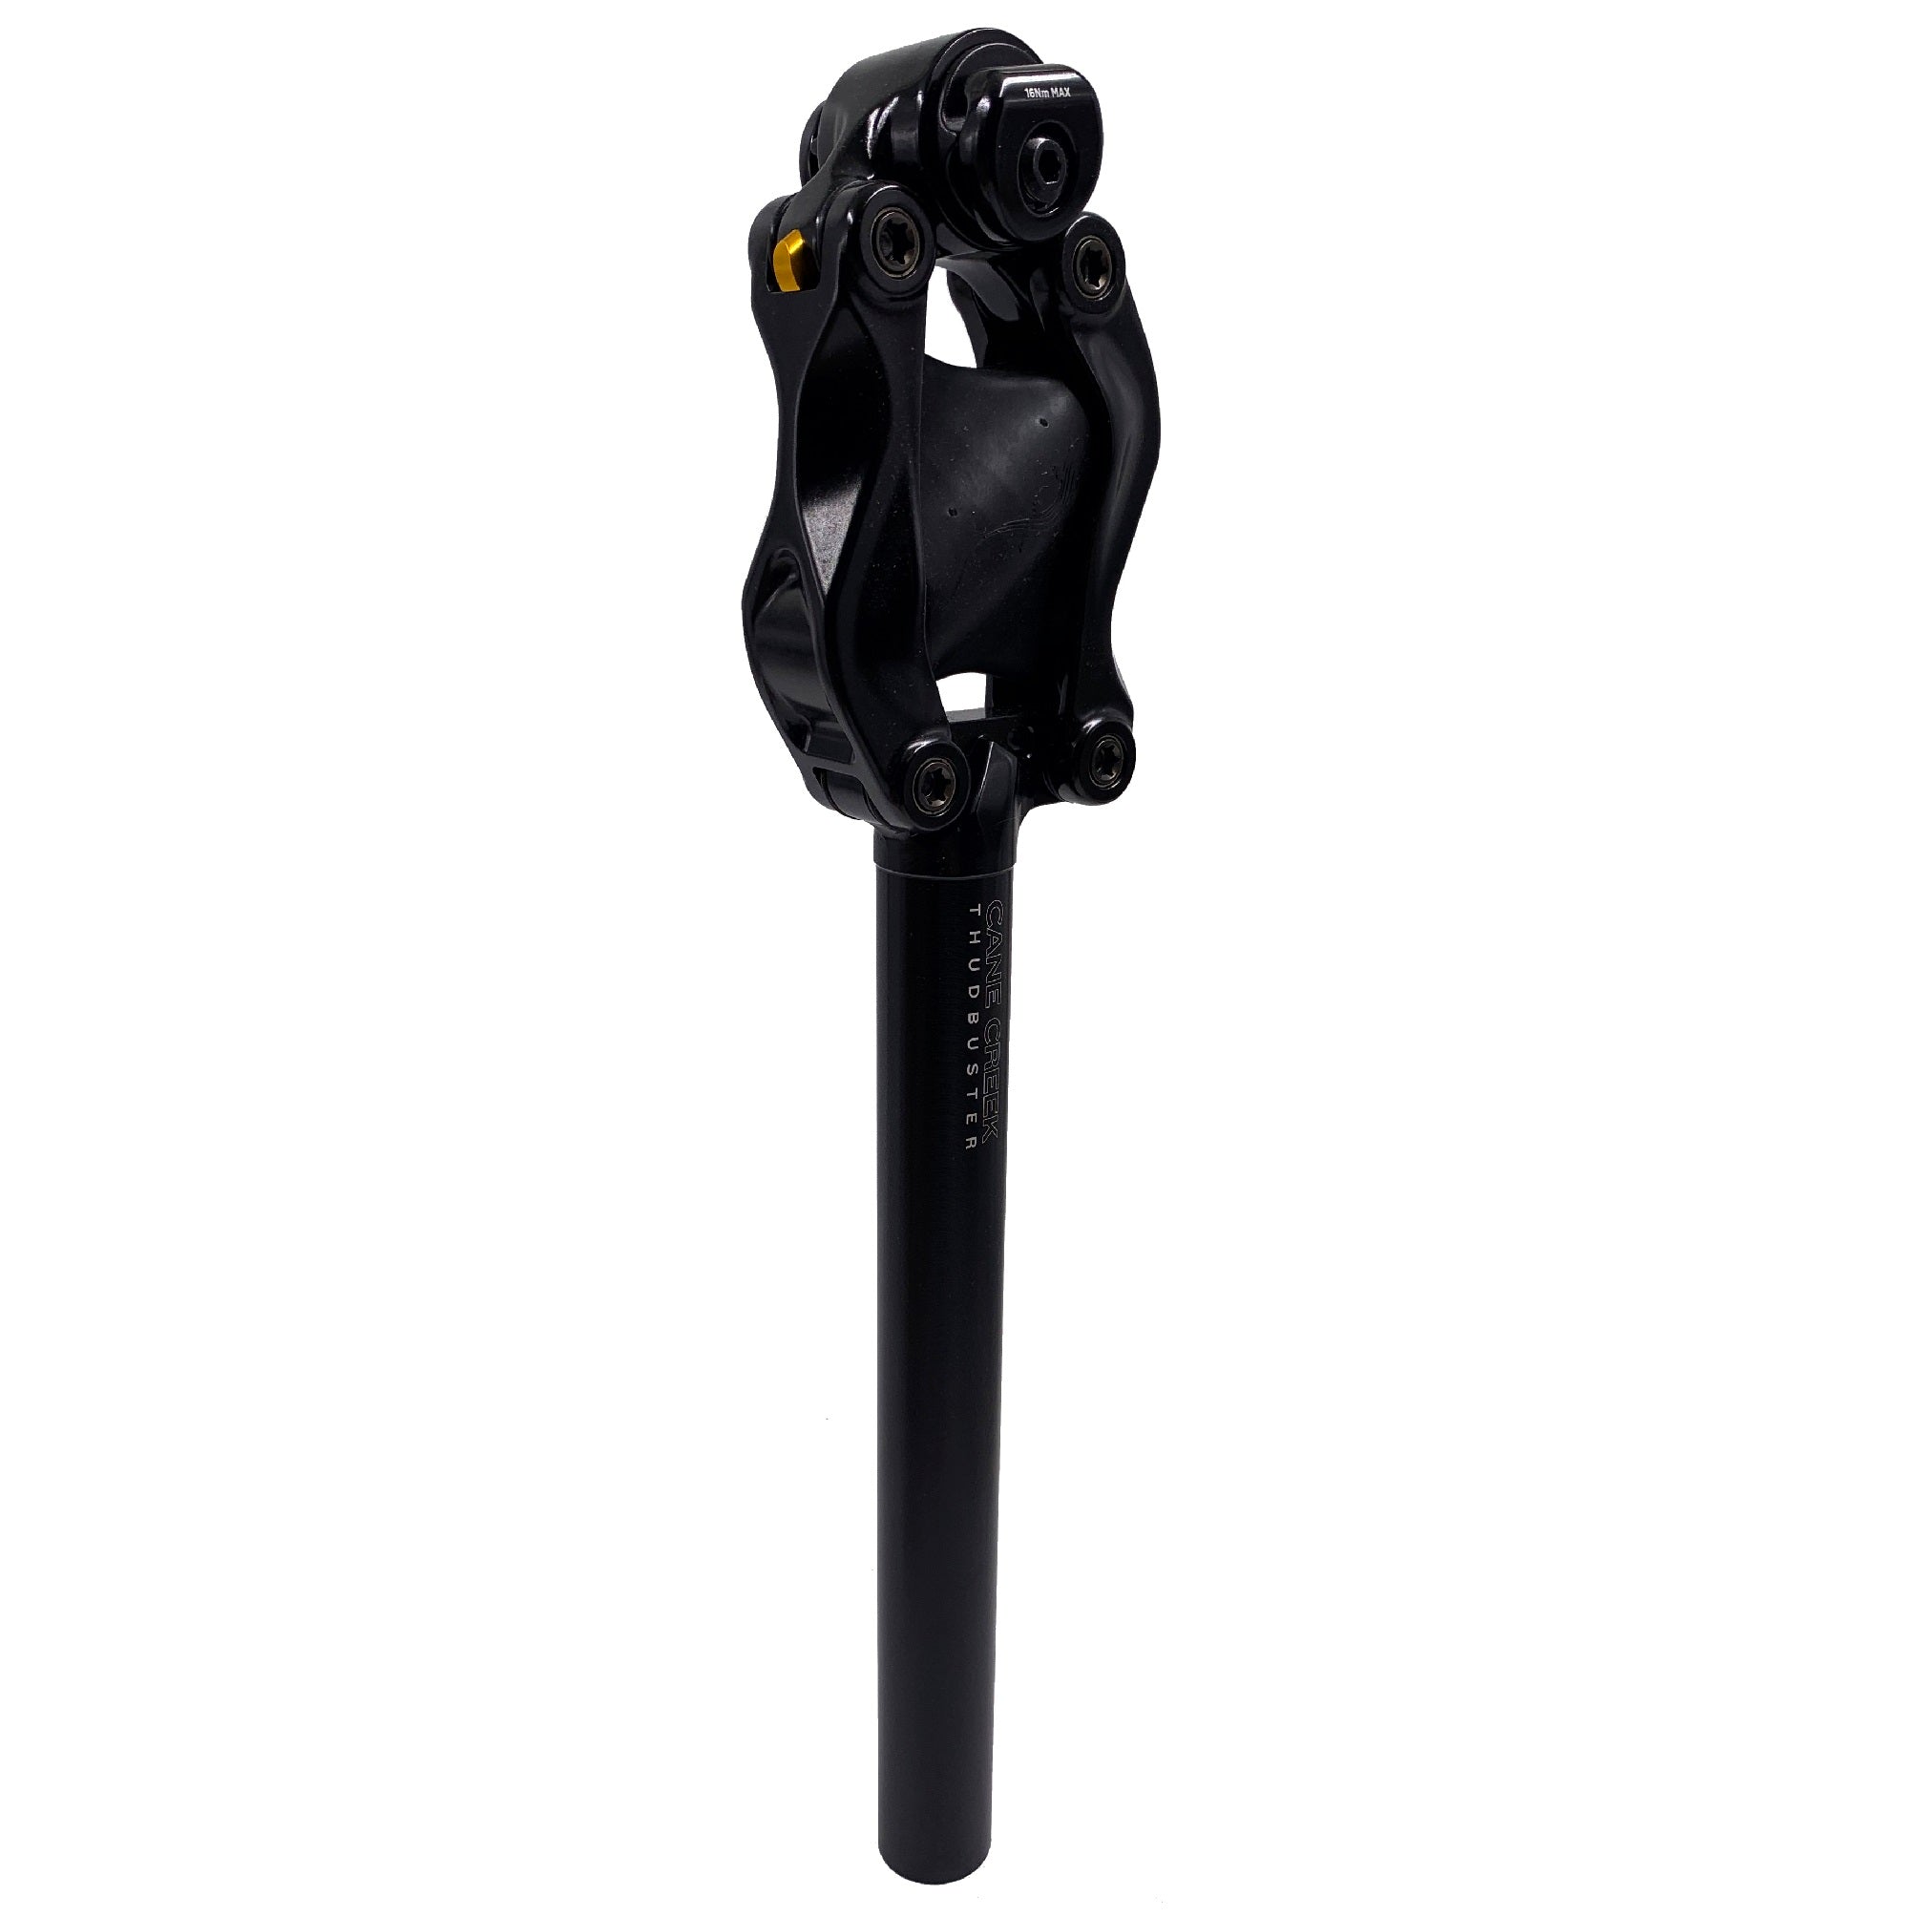 Cane Creek G4 LT Thudbuster Suspension Seatpost Long Travel